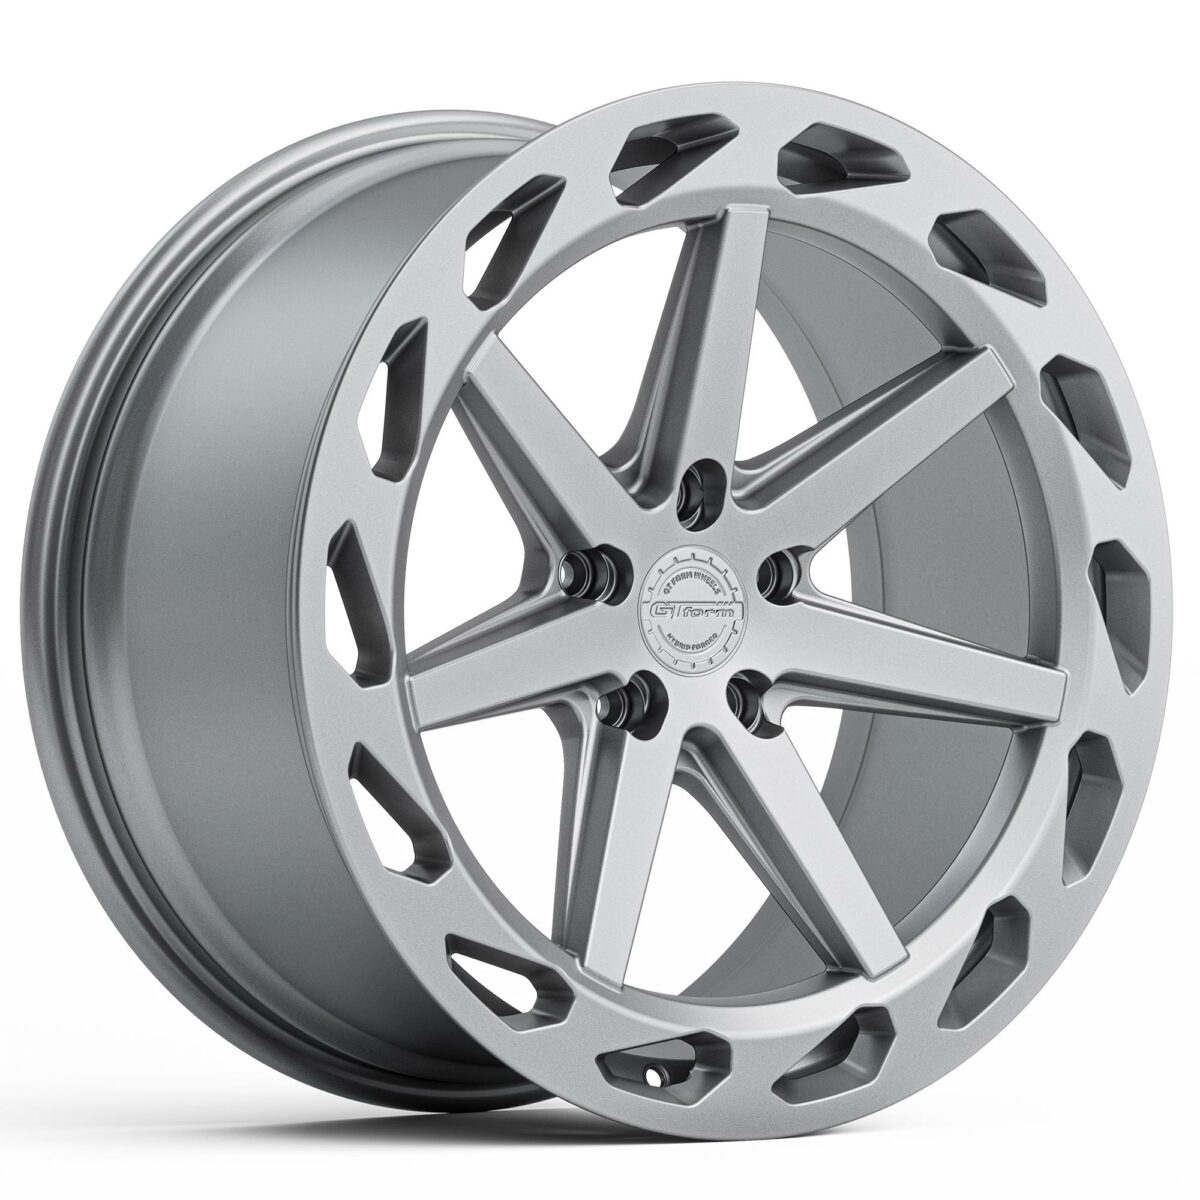 PERFORMANCE WHEELS GT FORM HF4.1 HYBRID FORGED GLOSS SILVER 20X9 20X10 20X11 STAGGERED RIMS